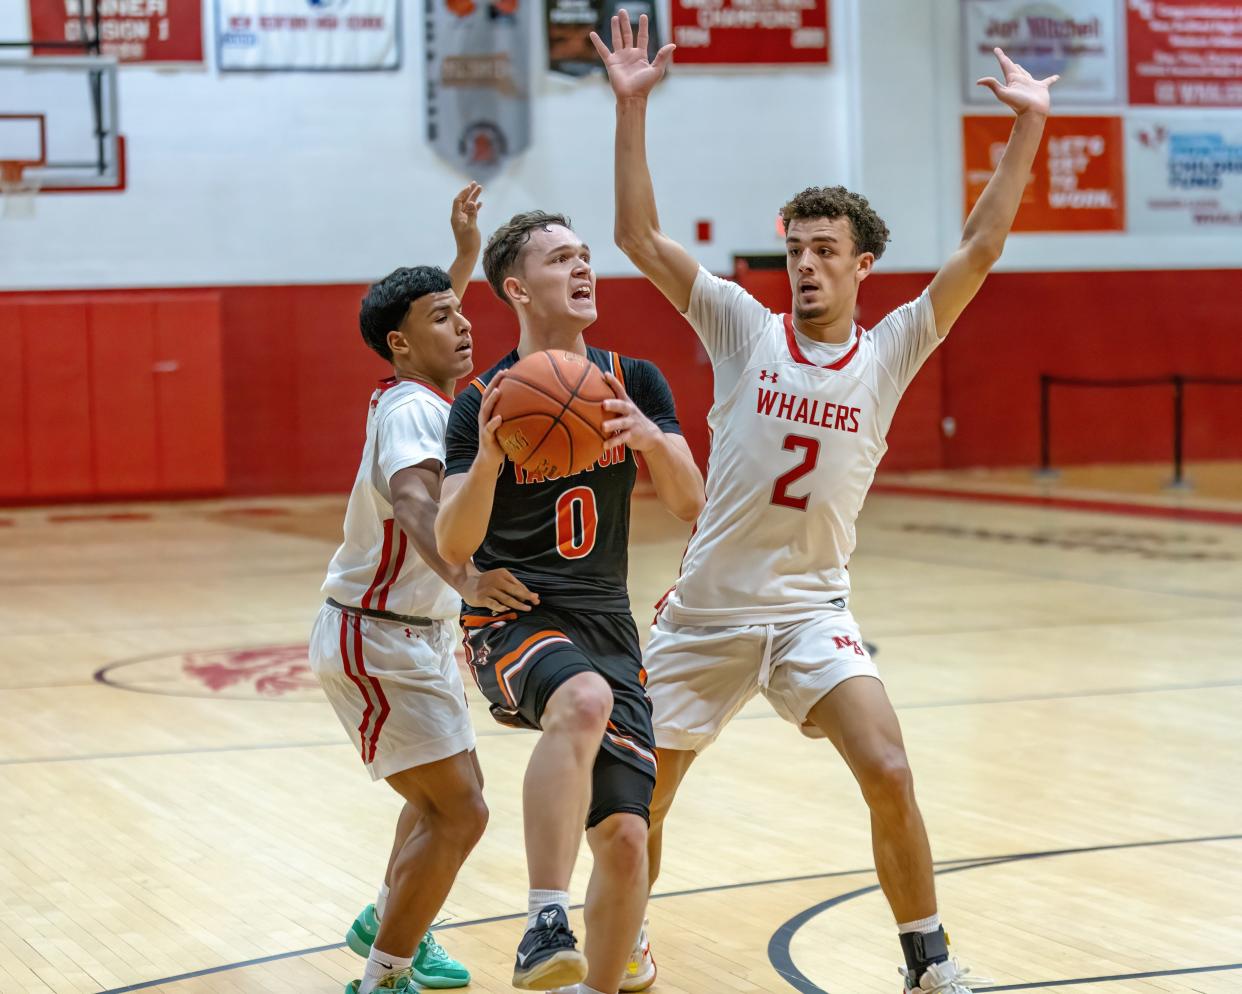 Dezmond Brunskill (2) of New Bedford High School and teammate Marquize Gonsalves attempt to deny Taunton Point Guard Troy Santos (0) access to the basket.